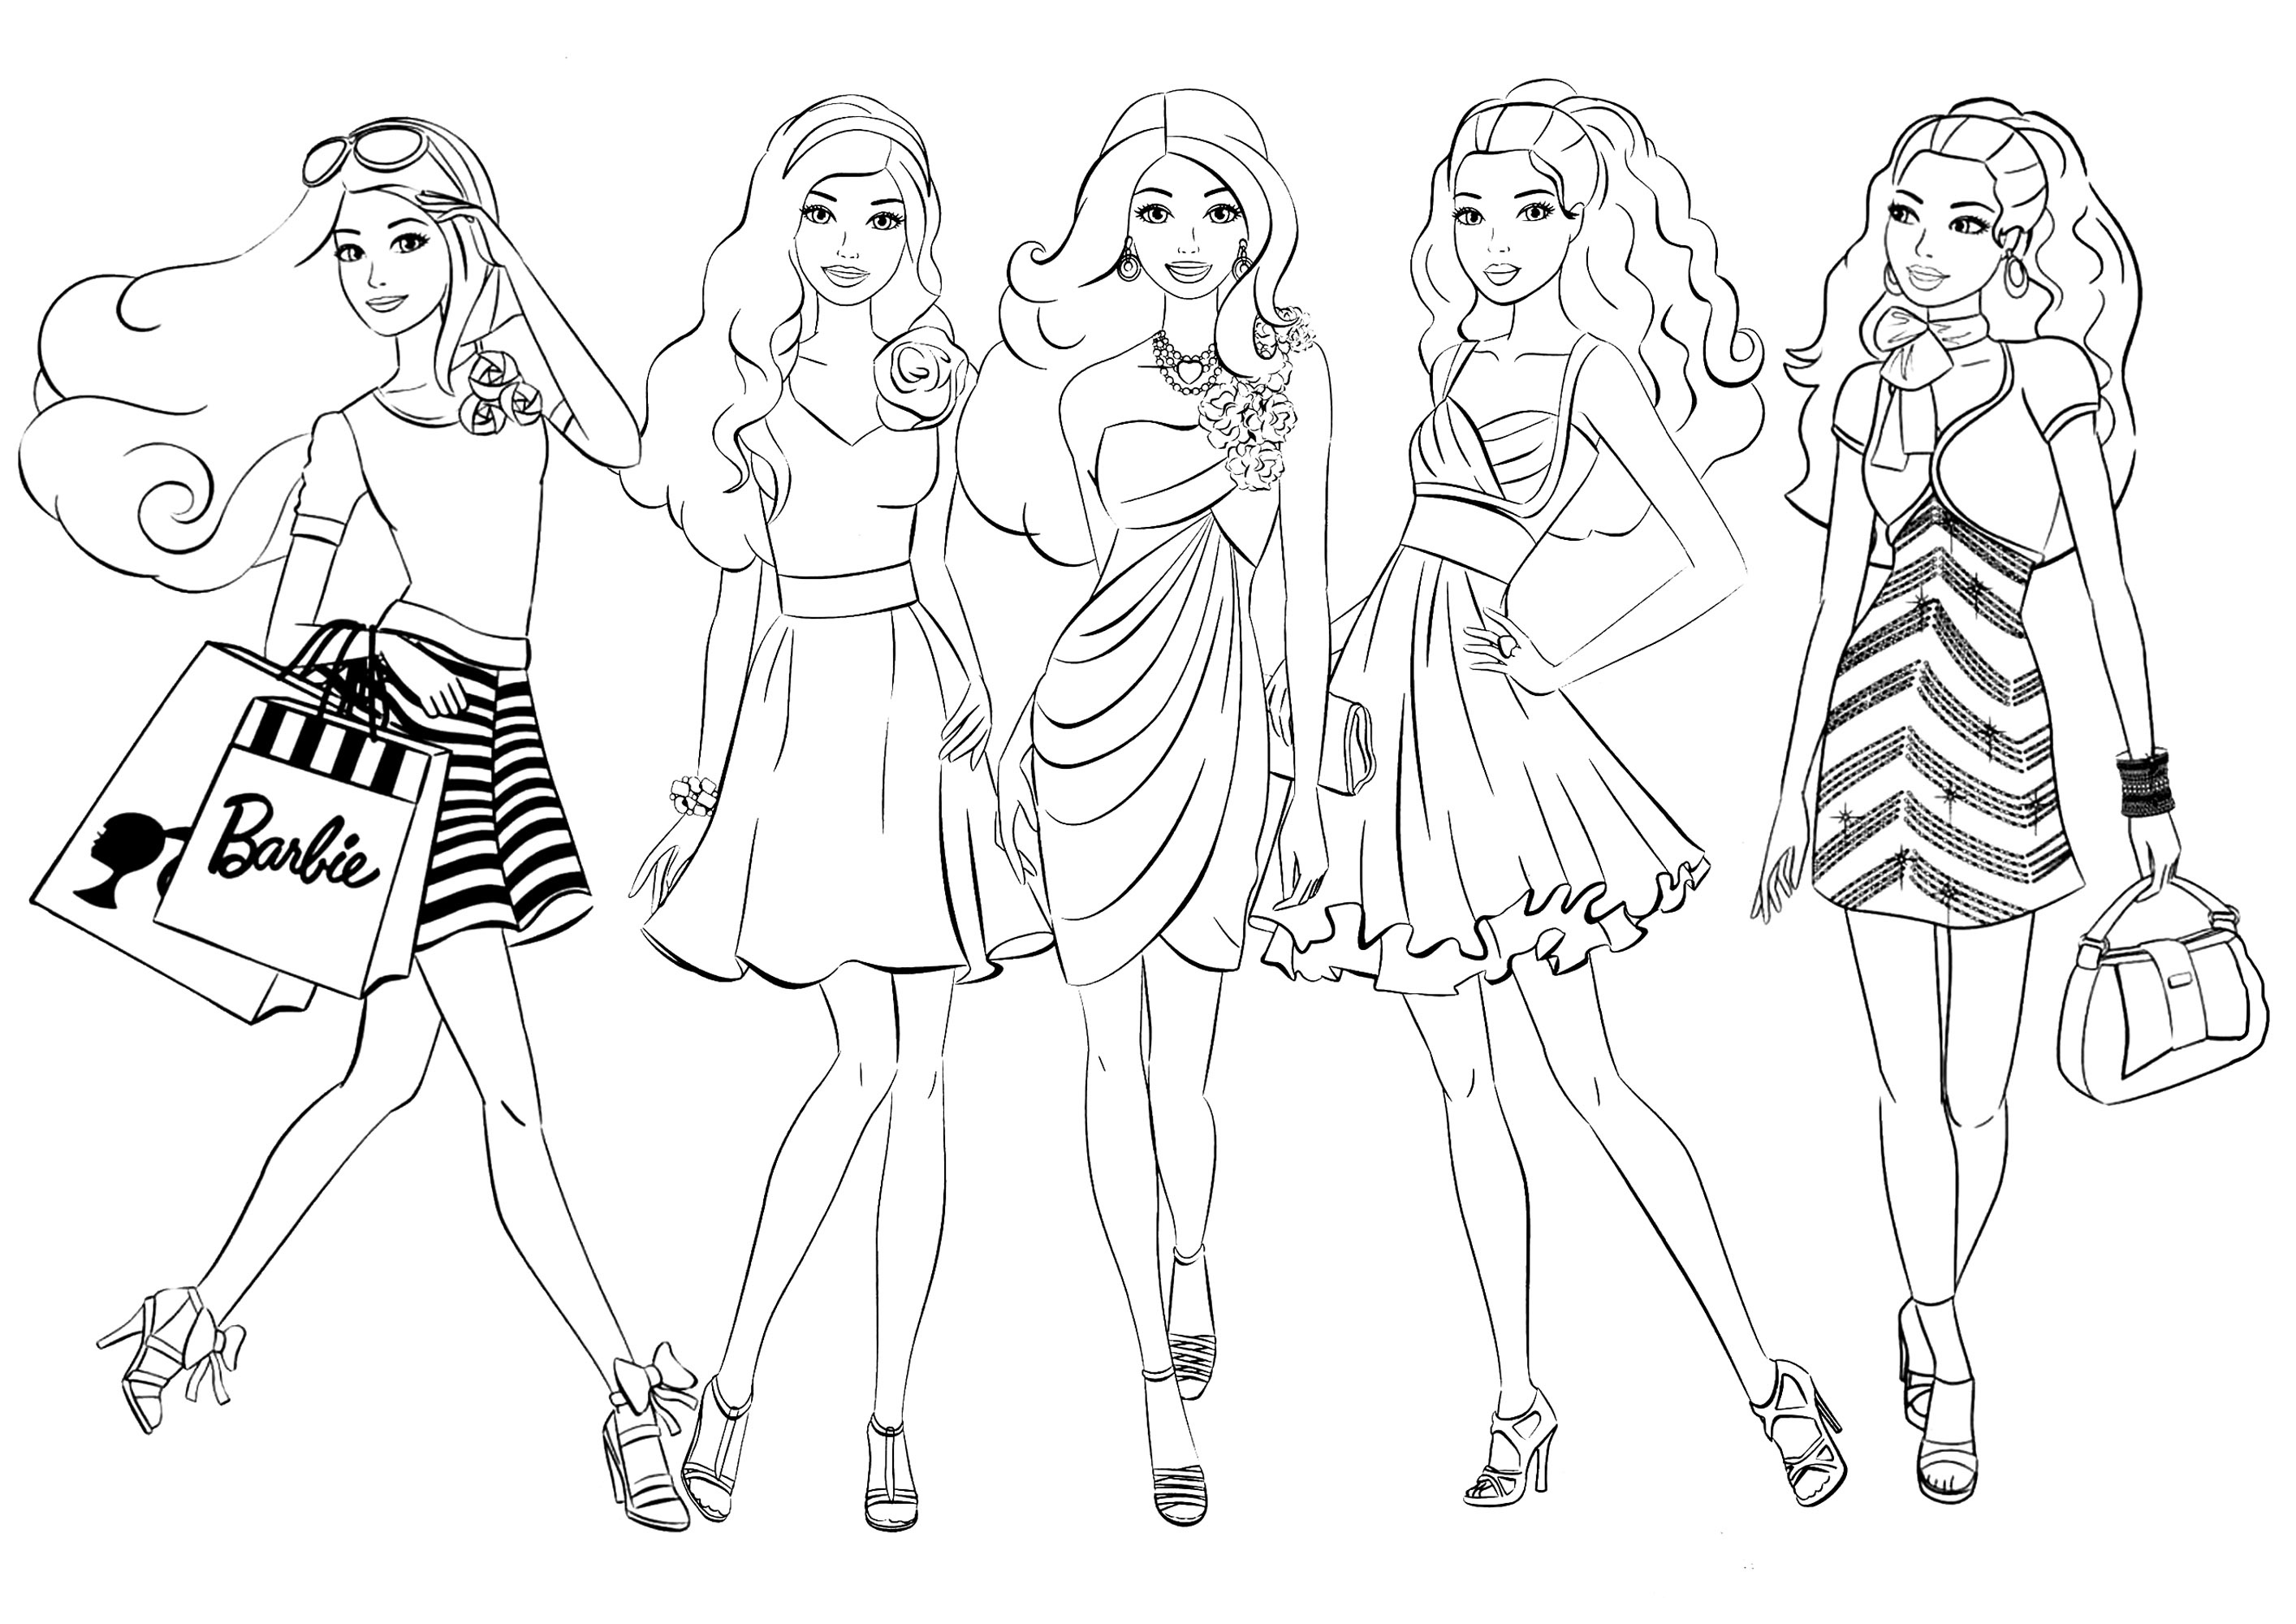 Five Barbie dolls. This coloring page features five characters inspired by Barbie dolls, with different outfits for you to color as you wish.